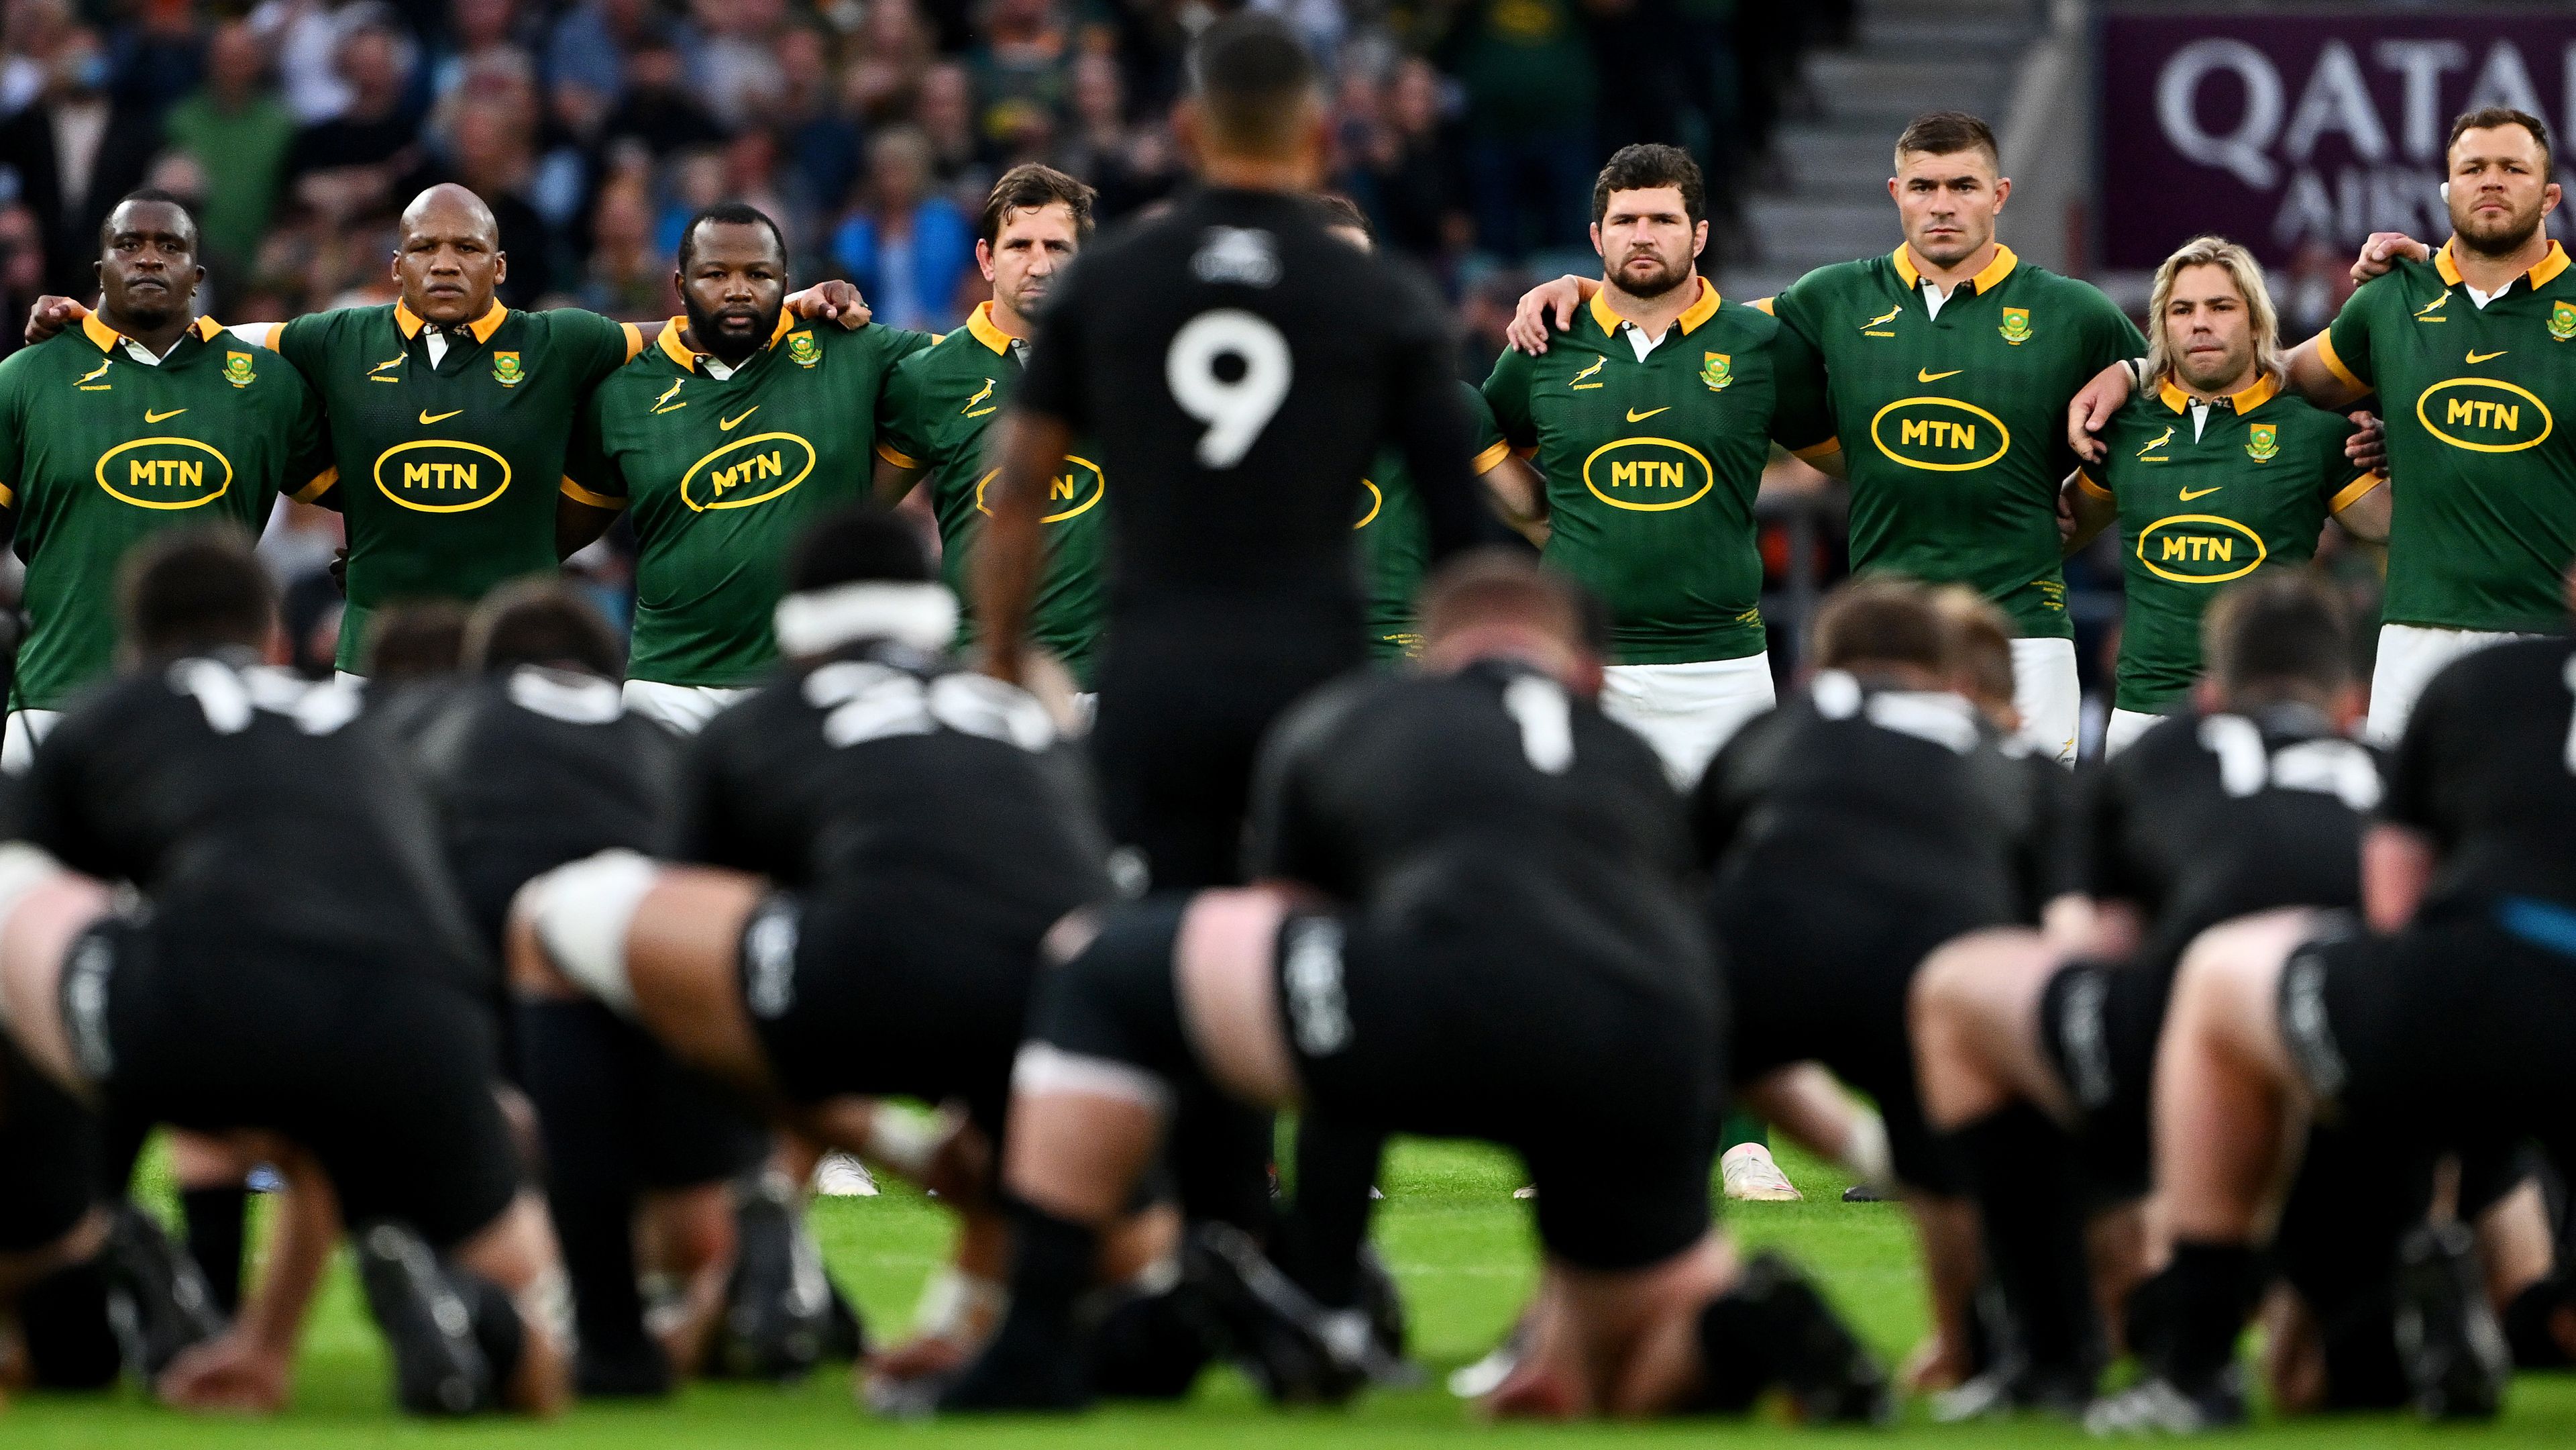 South Africa watch on as Aaron Smith of New Zealand leads the haka.